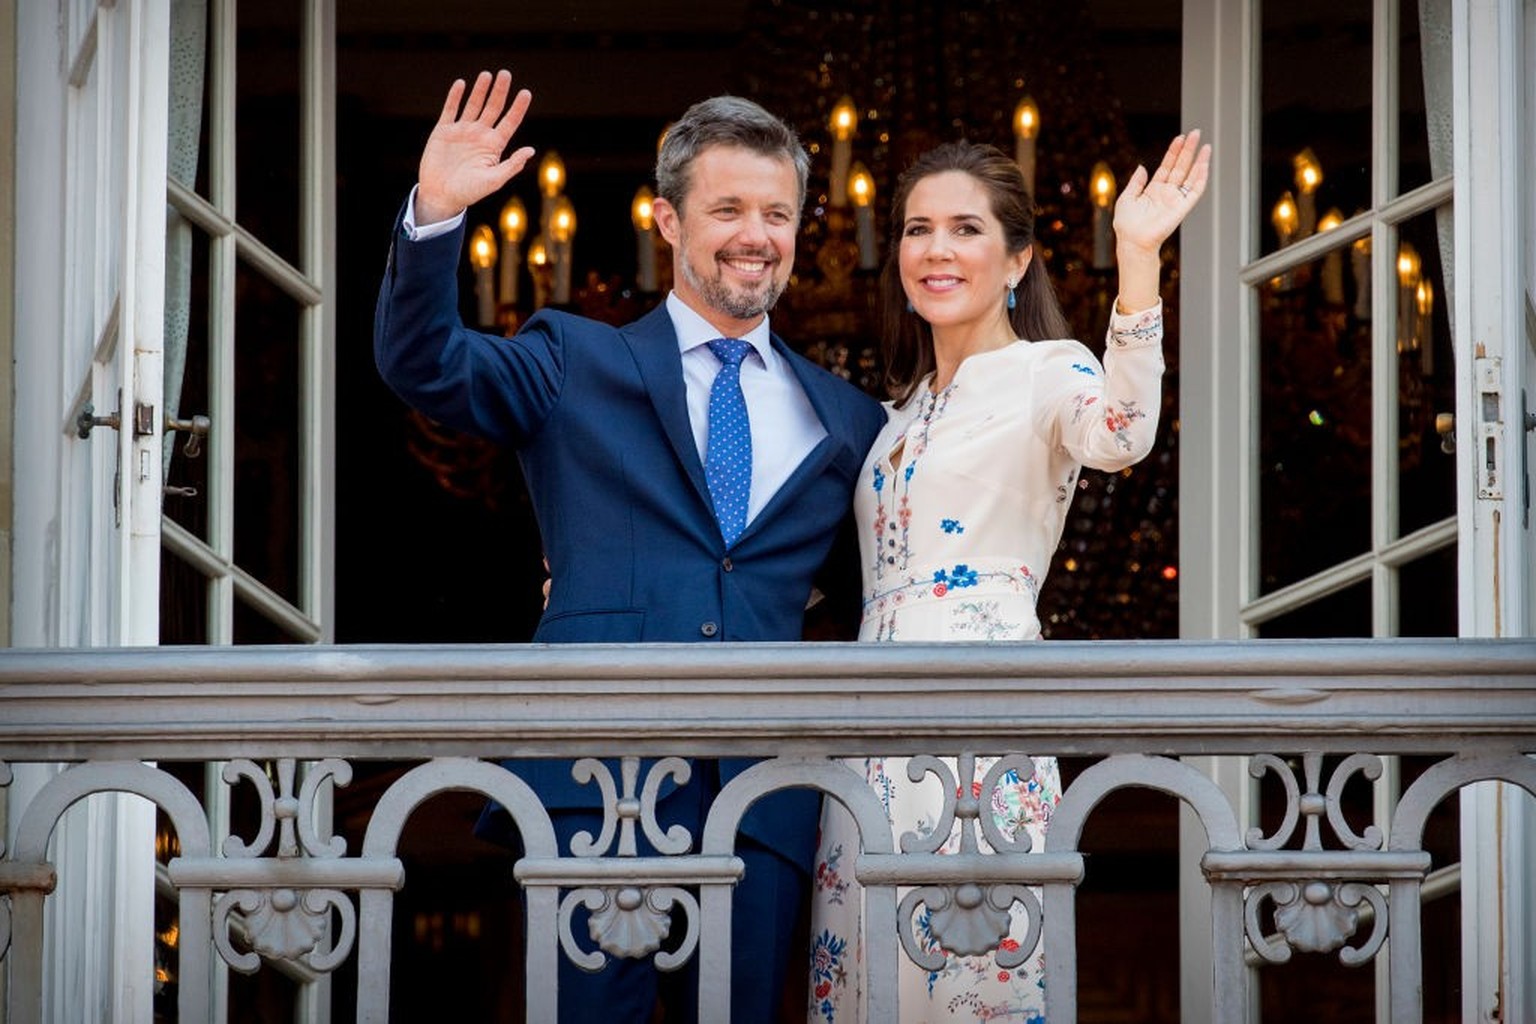 COPENHAGEN, DENMARK - MAY 26: Crown Prince Frederik of Denmark and Crown Princess Mary of Denmark waves as the Royal Life Guards carry out the changing of the guard on Amalienborg Palace square on the ...